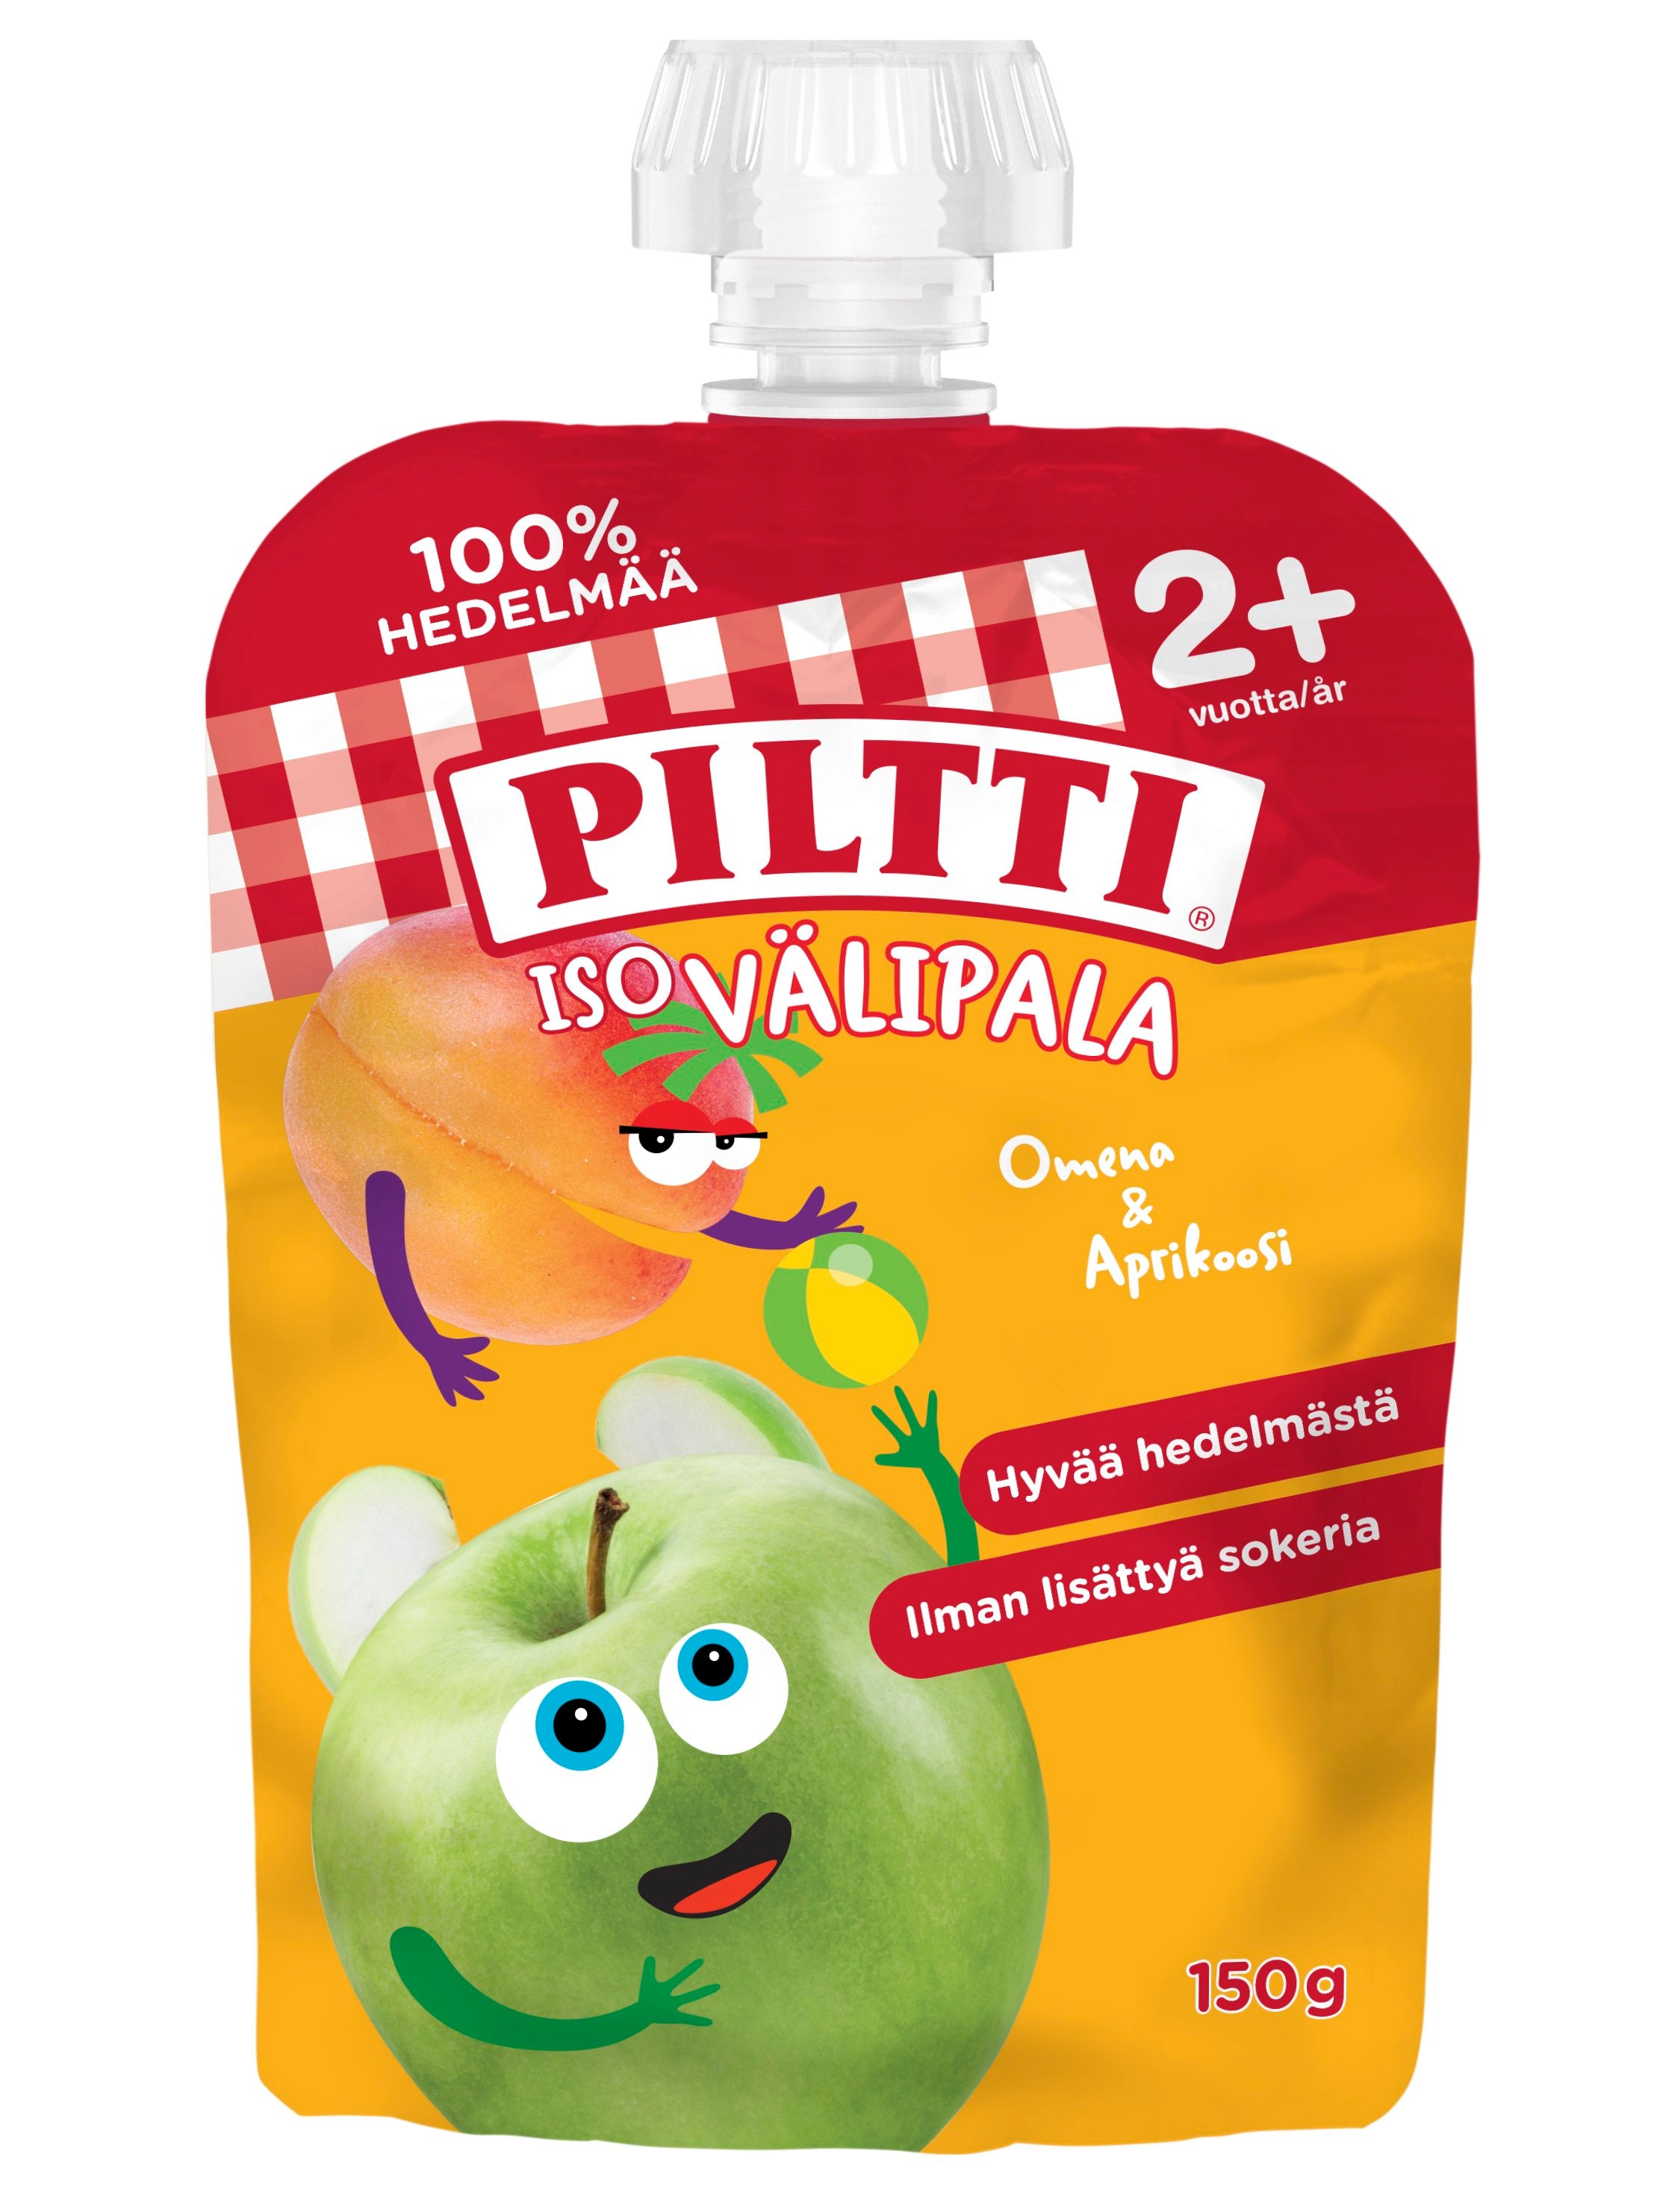 Piltti Iso Snack 150g Apple and Apricot 2+y portion bag 6 PCS MULTIPAC –  